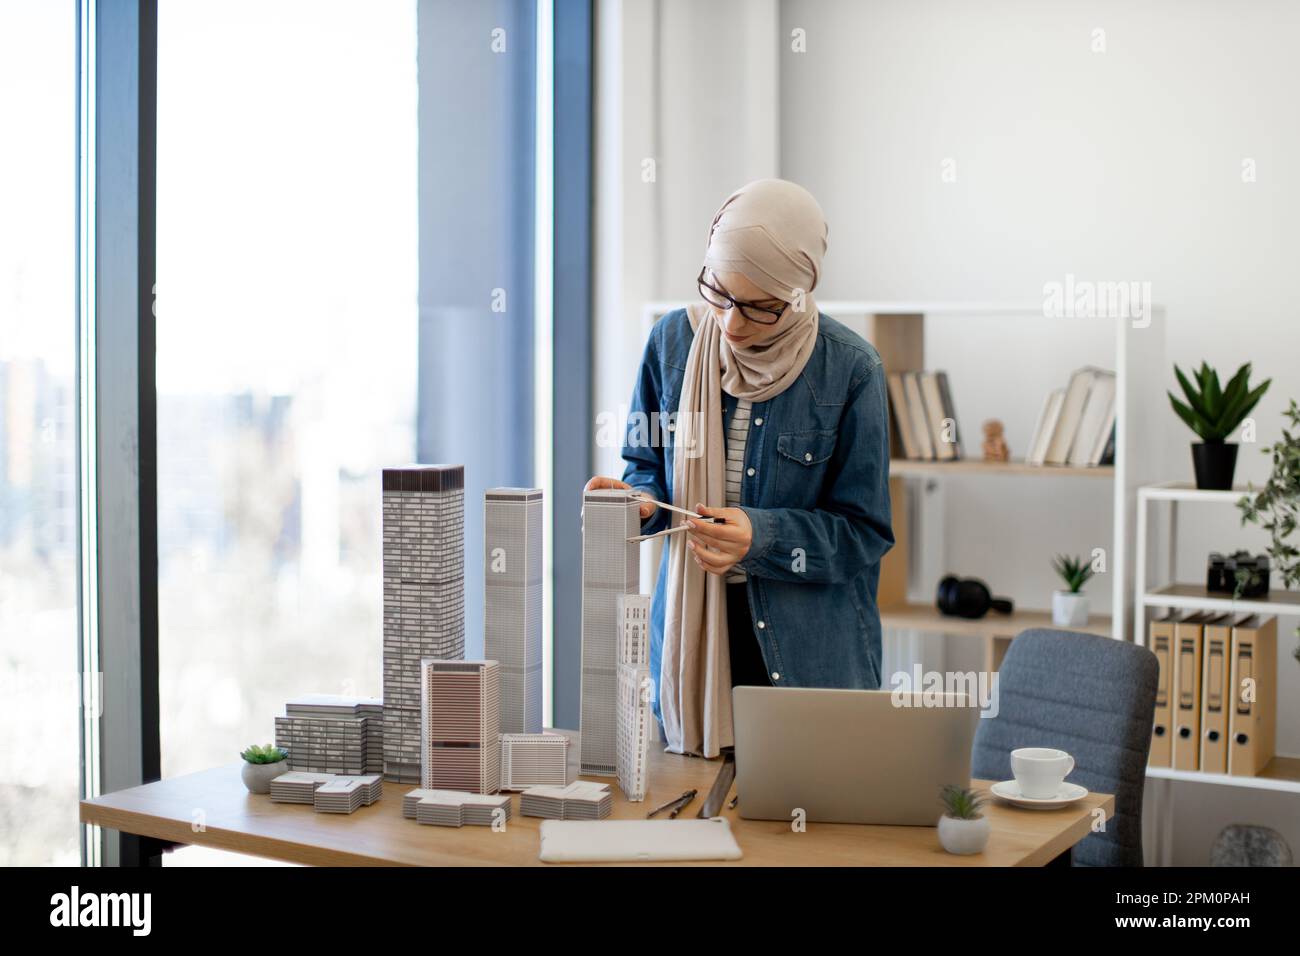 Arabian businesswoman in hijab and spectacles examining building model with compass while standing near writing desk with coffee and gadgets on it. Talanted architect using drawing tools at work. Stock Photo